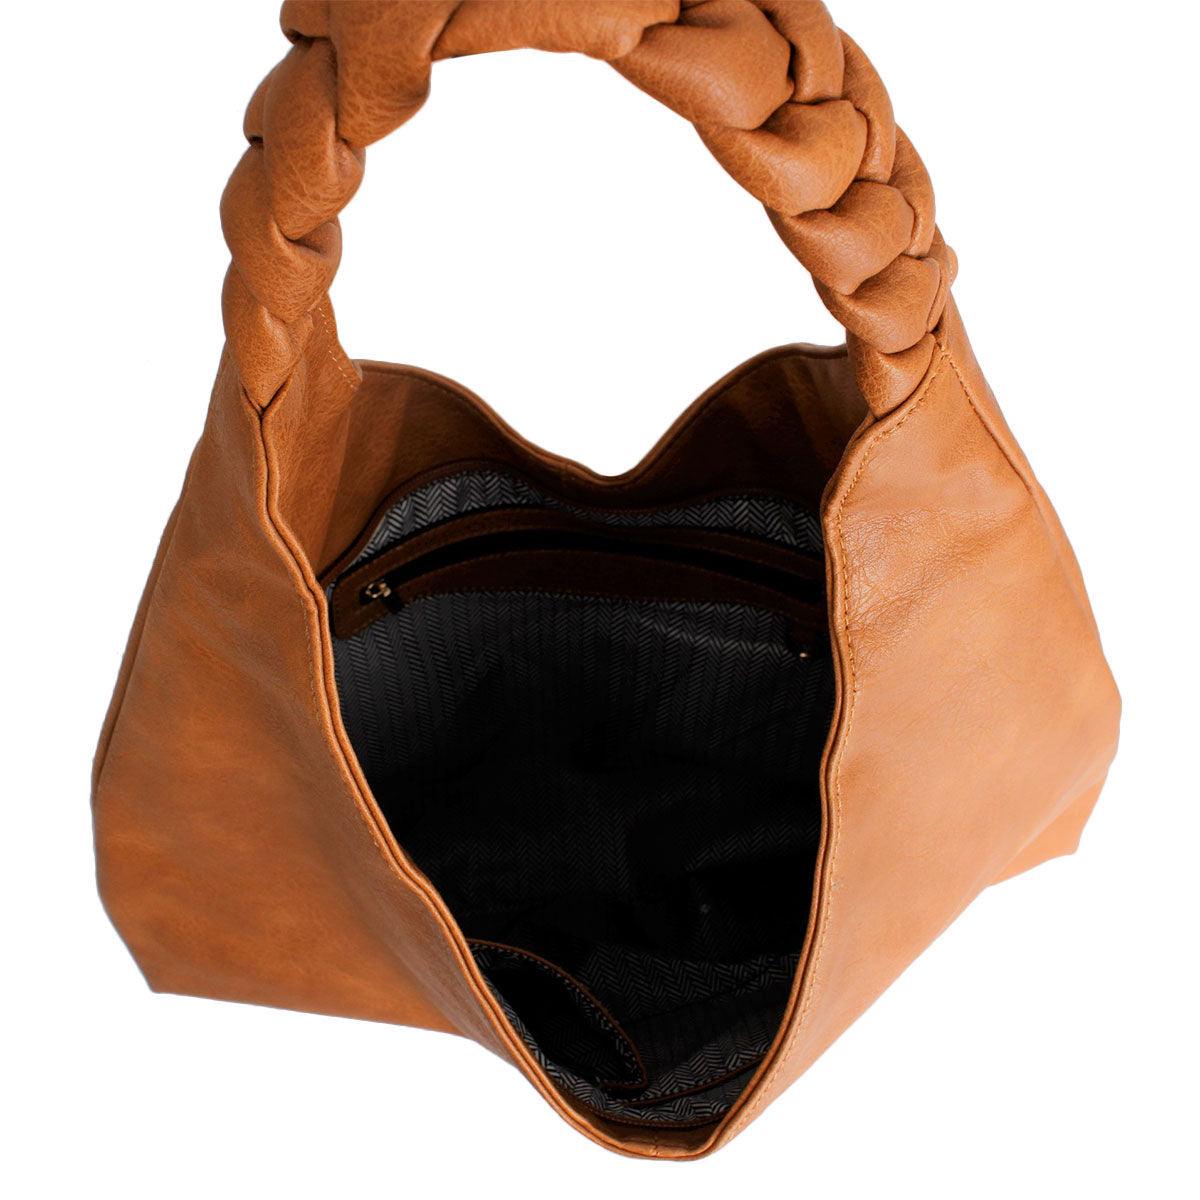 Stylish Brown Vegan Leather Hobo Bag: Perfect Mix of Fashion and Function for Everyday Use